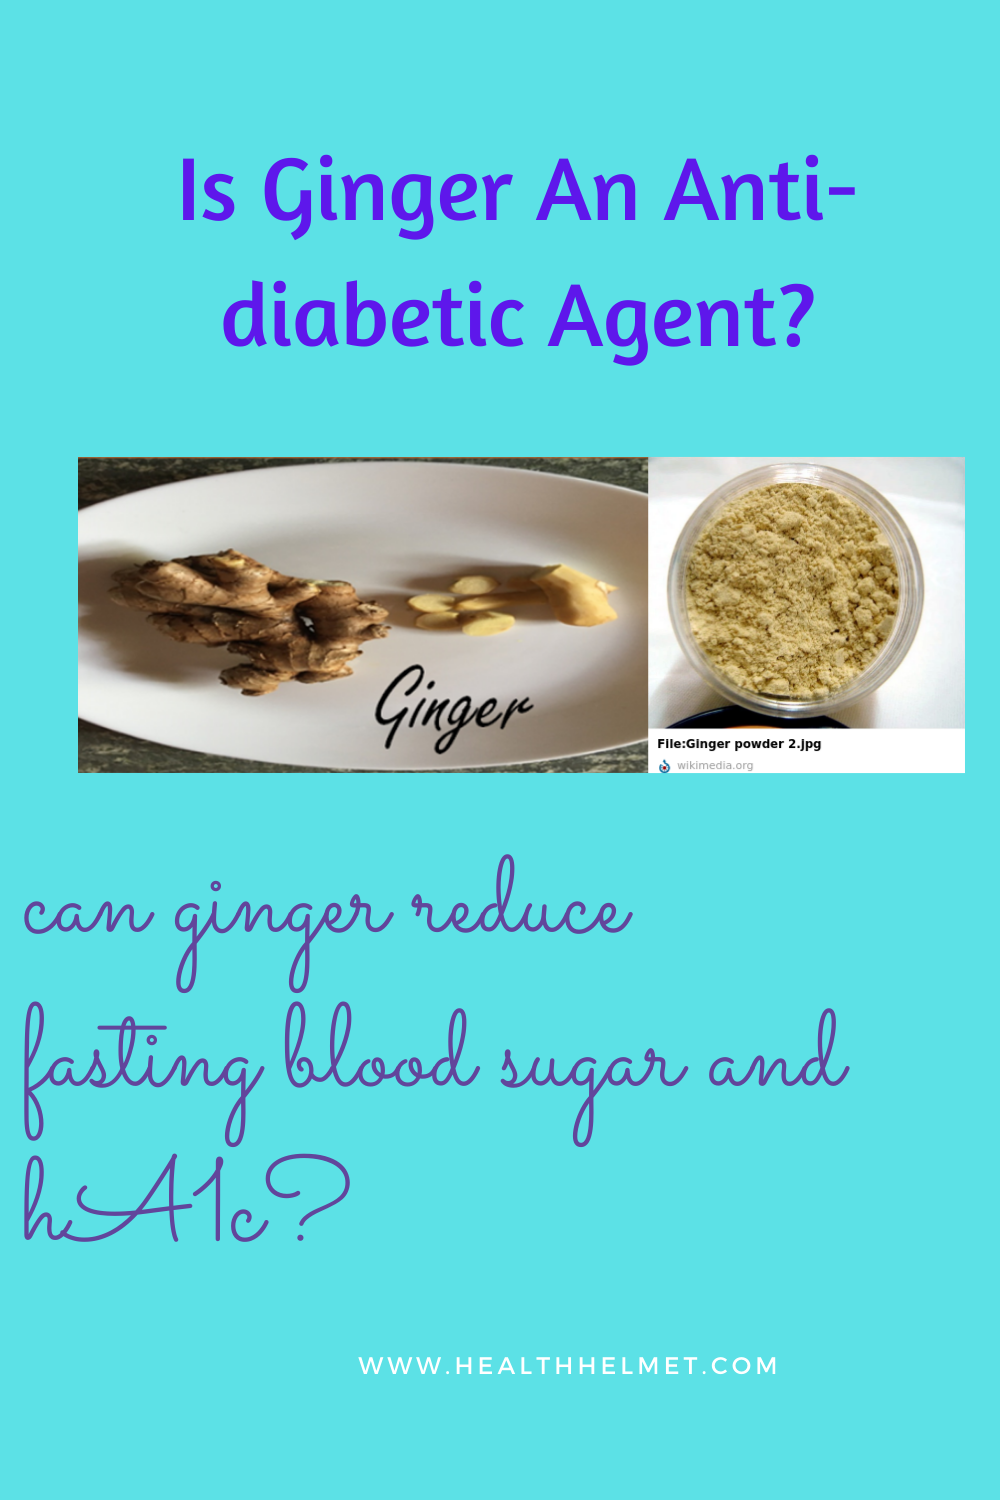 Is-Ginger-An-Anti-diabetic-Agent?